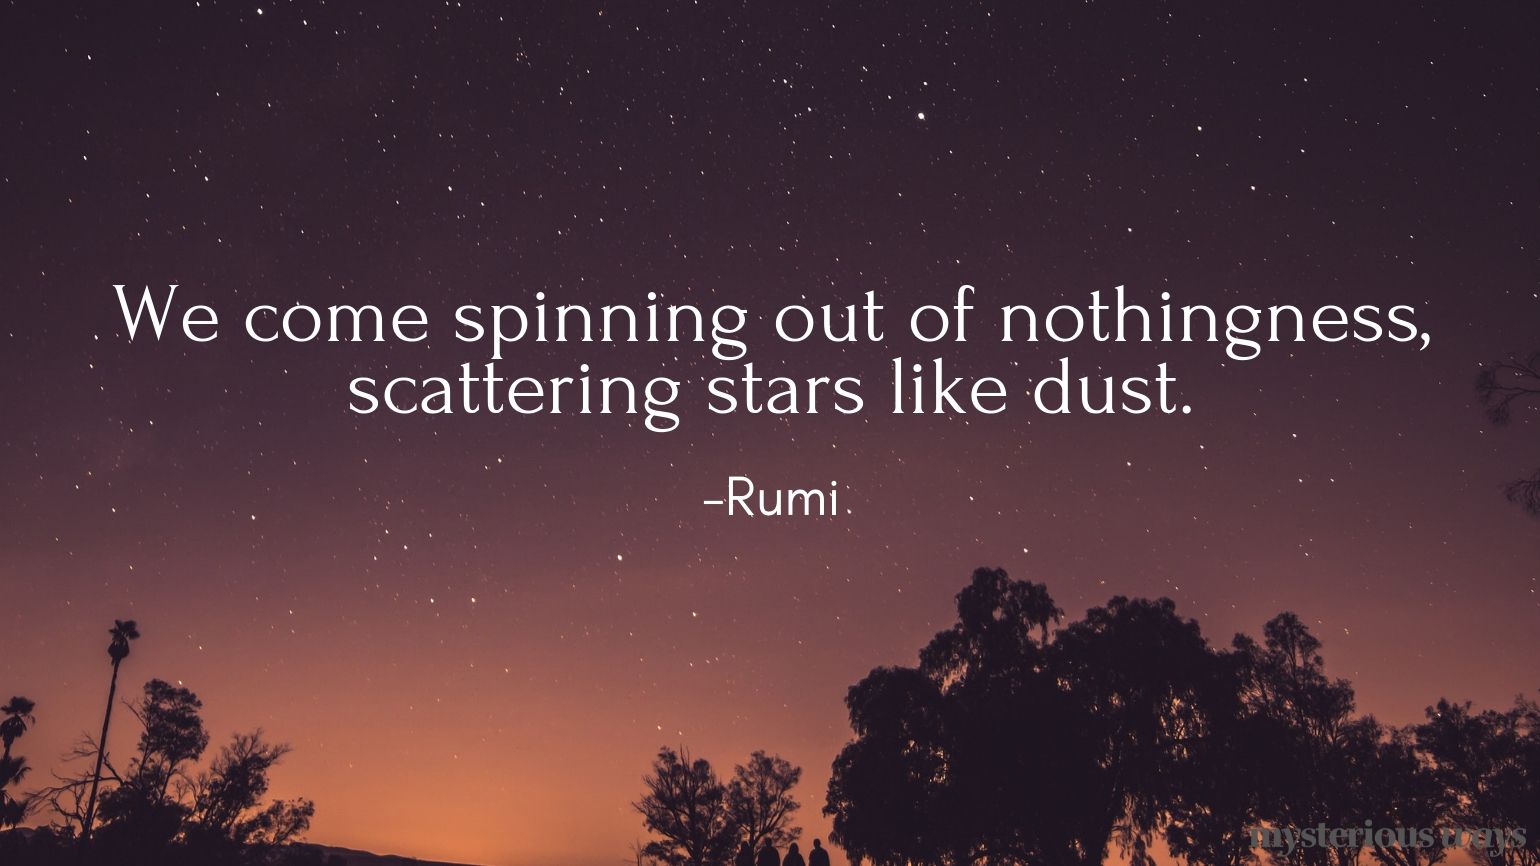 We come spinning out of nothingness, scattering stars like dust. —Rumi